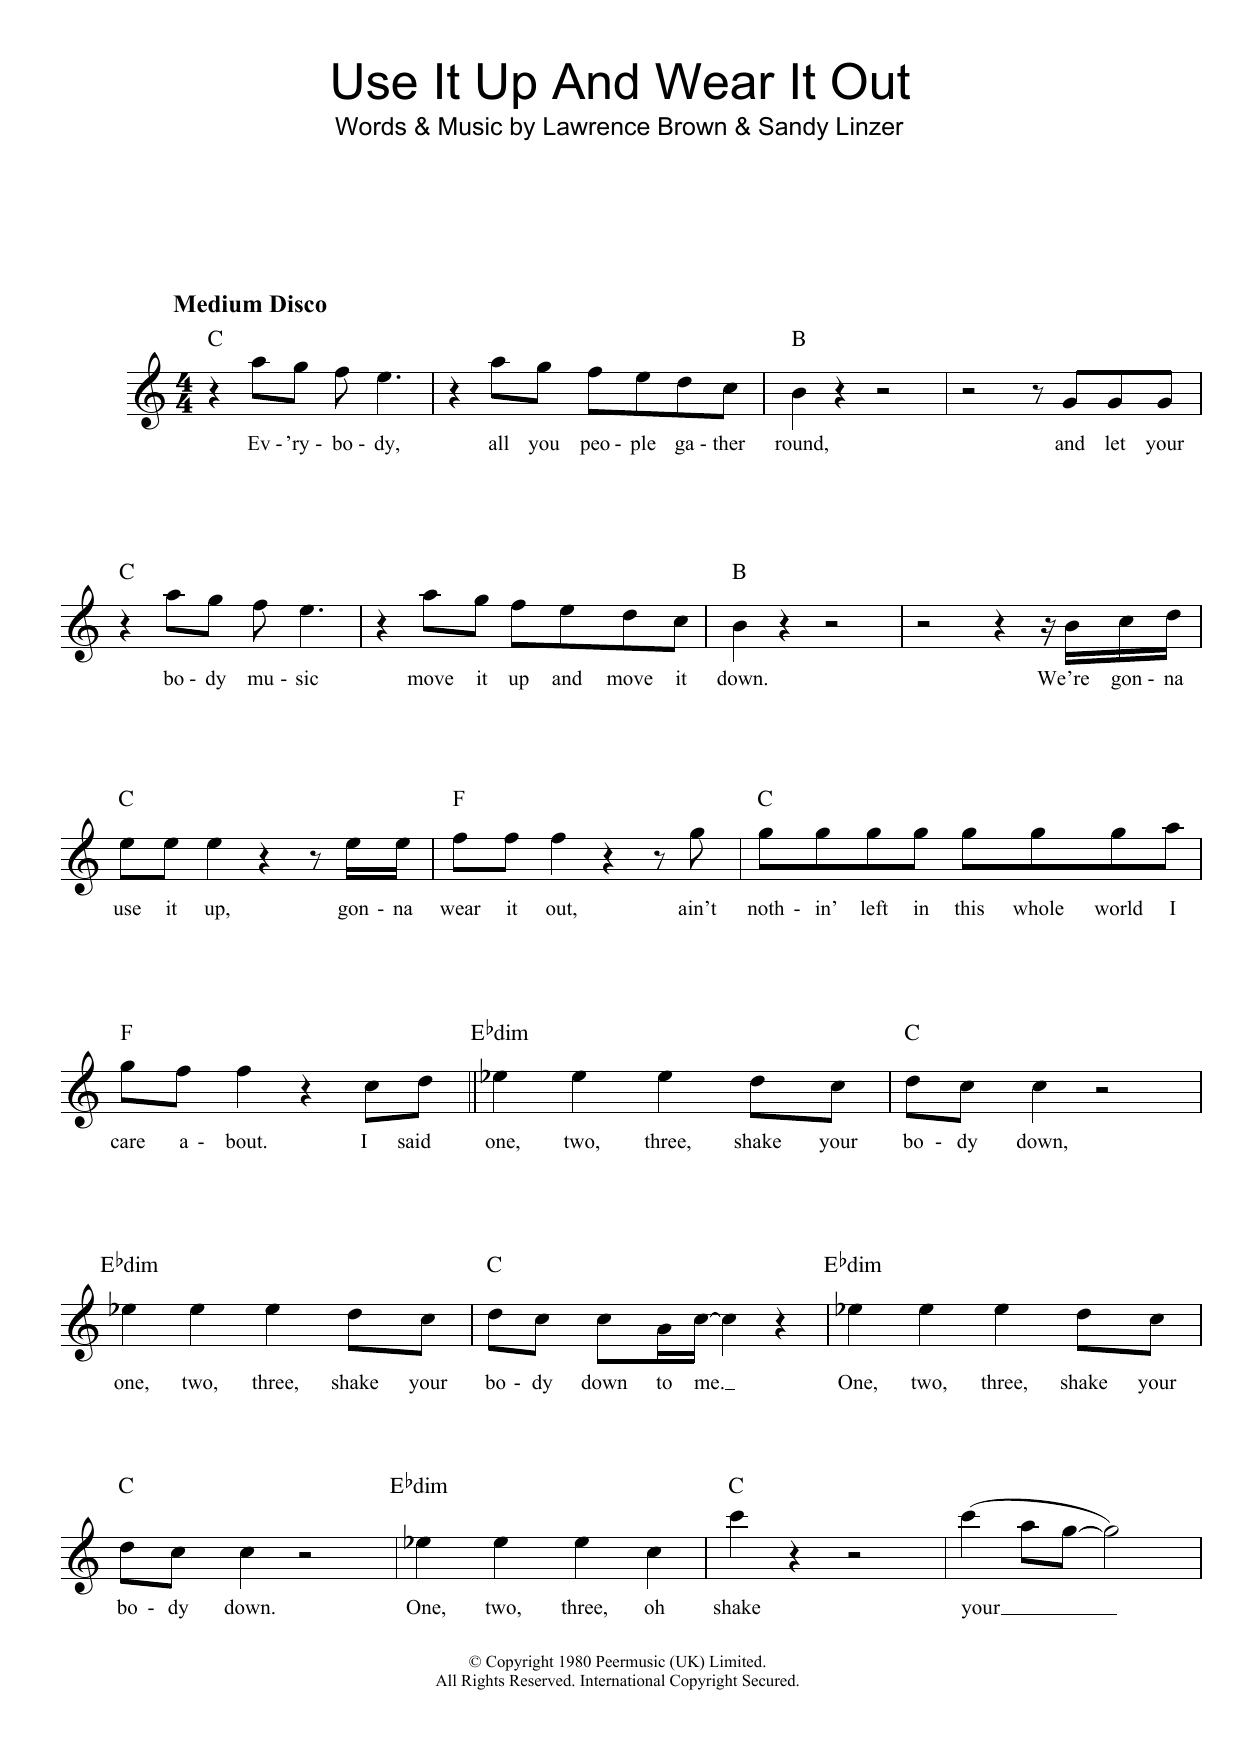 Download Odyssey Use It Up And Wear It Out Sheet Music